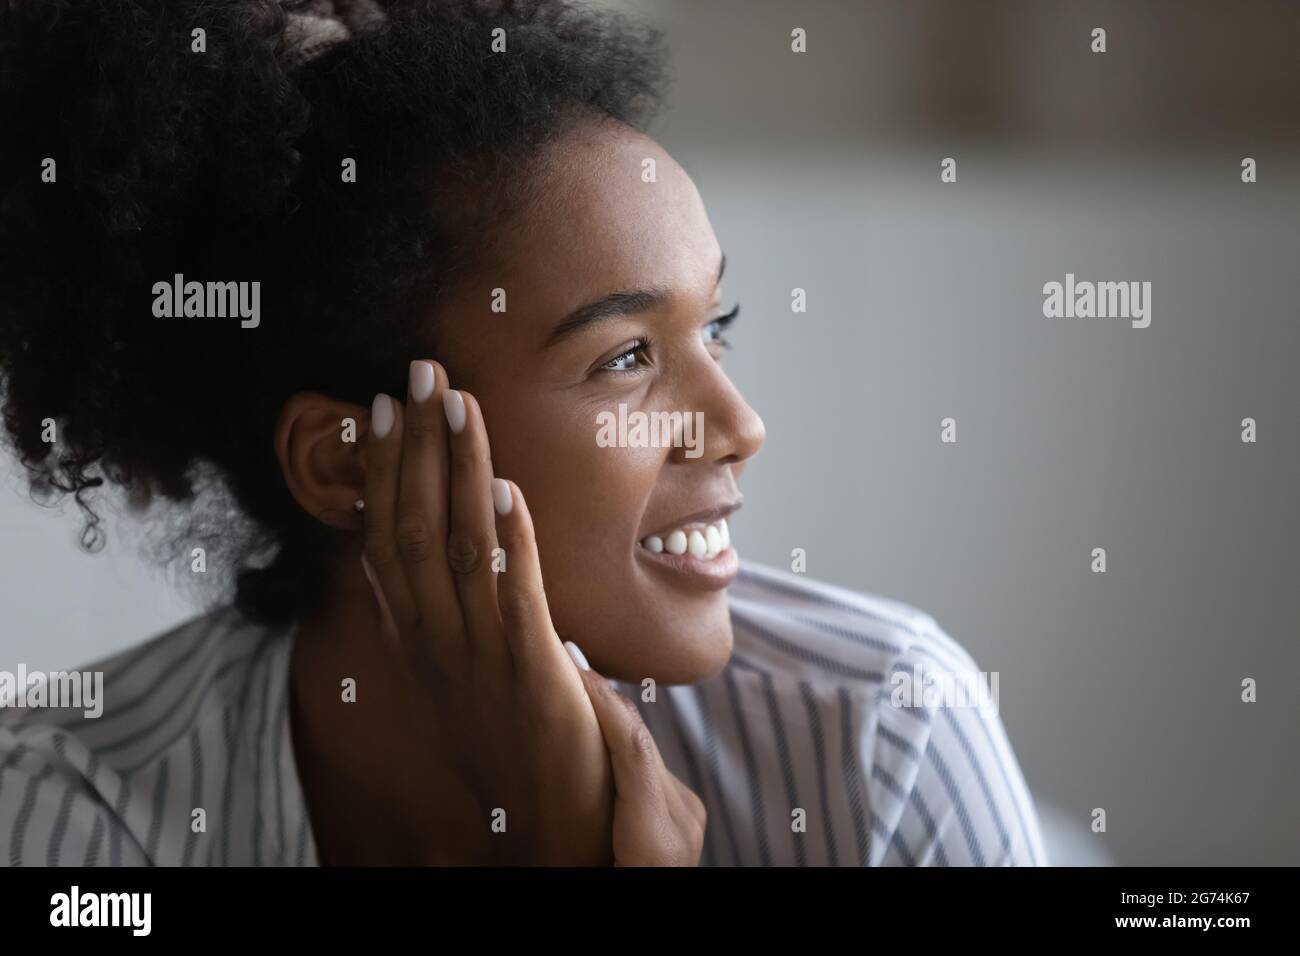 Close up profile of dreamy smiling African American woman Stock Photo